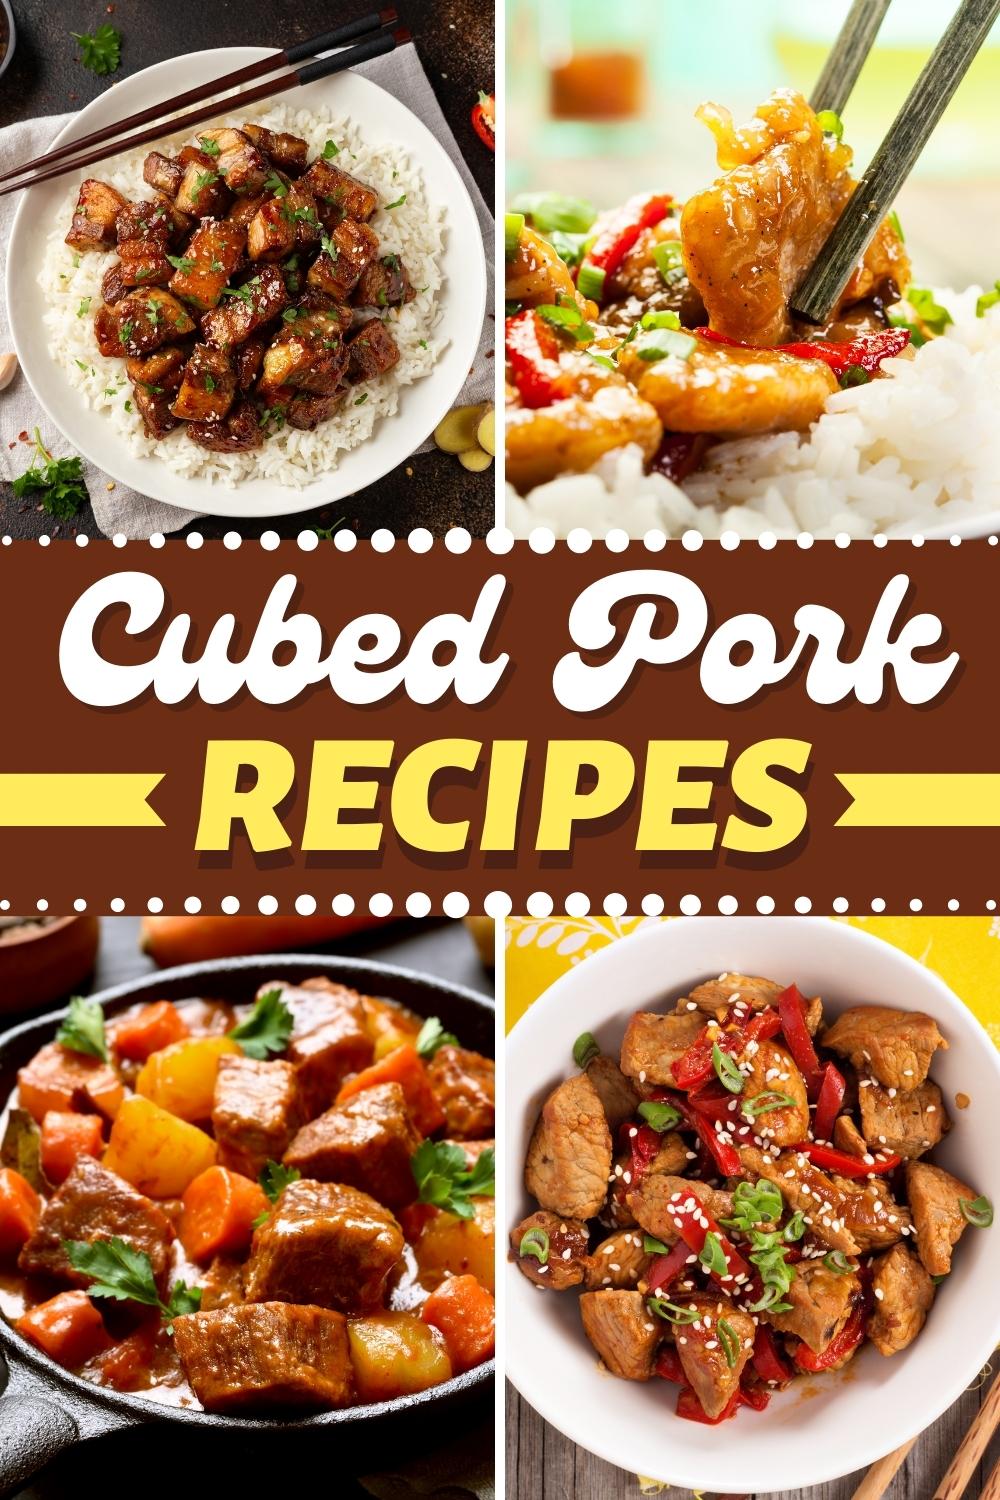 13 Best Cubed Pork Recipes - Insanely Good